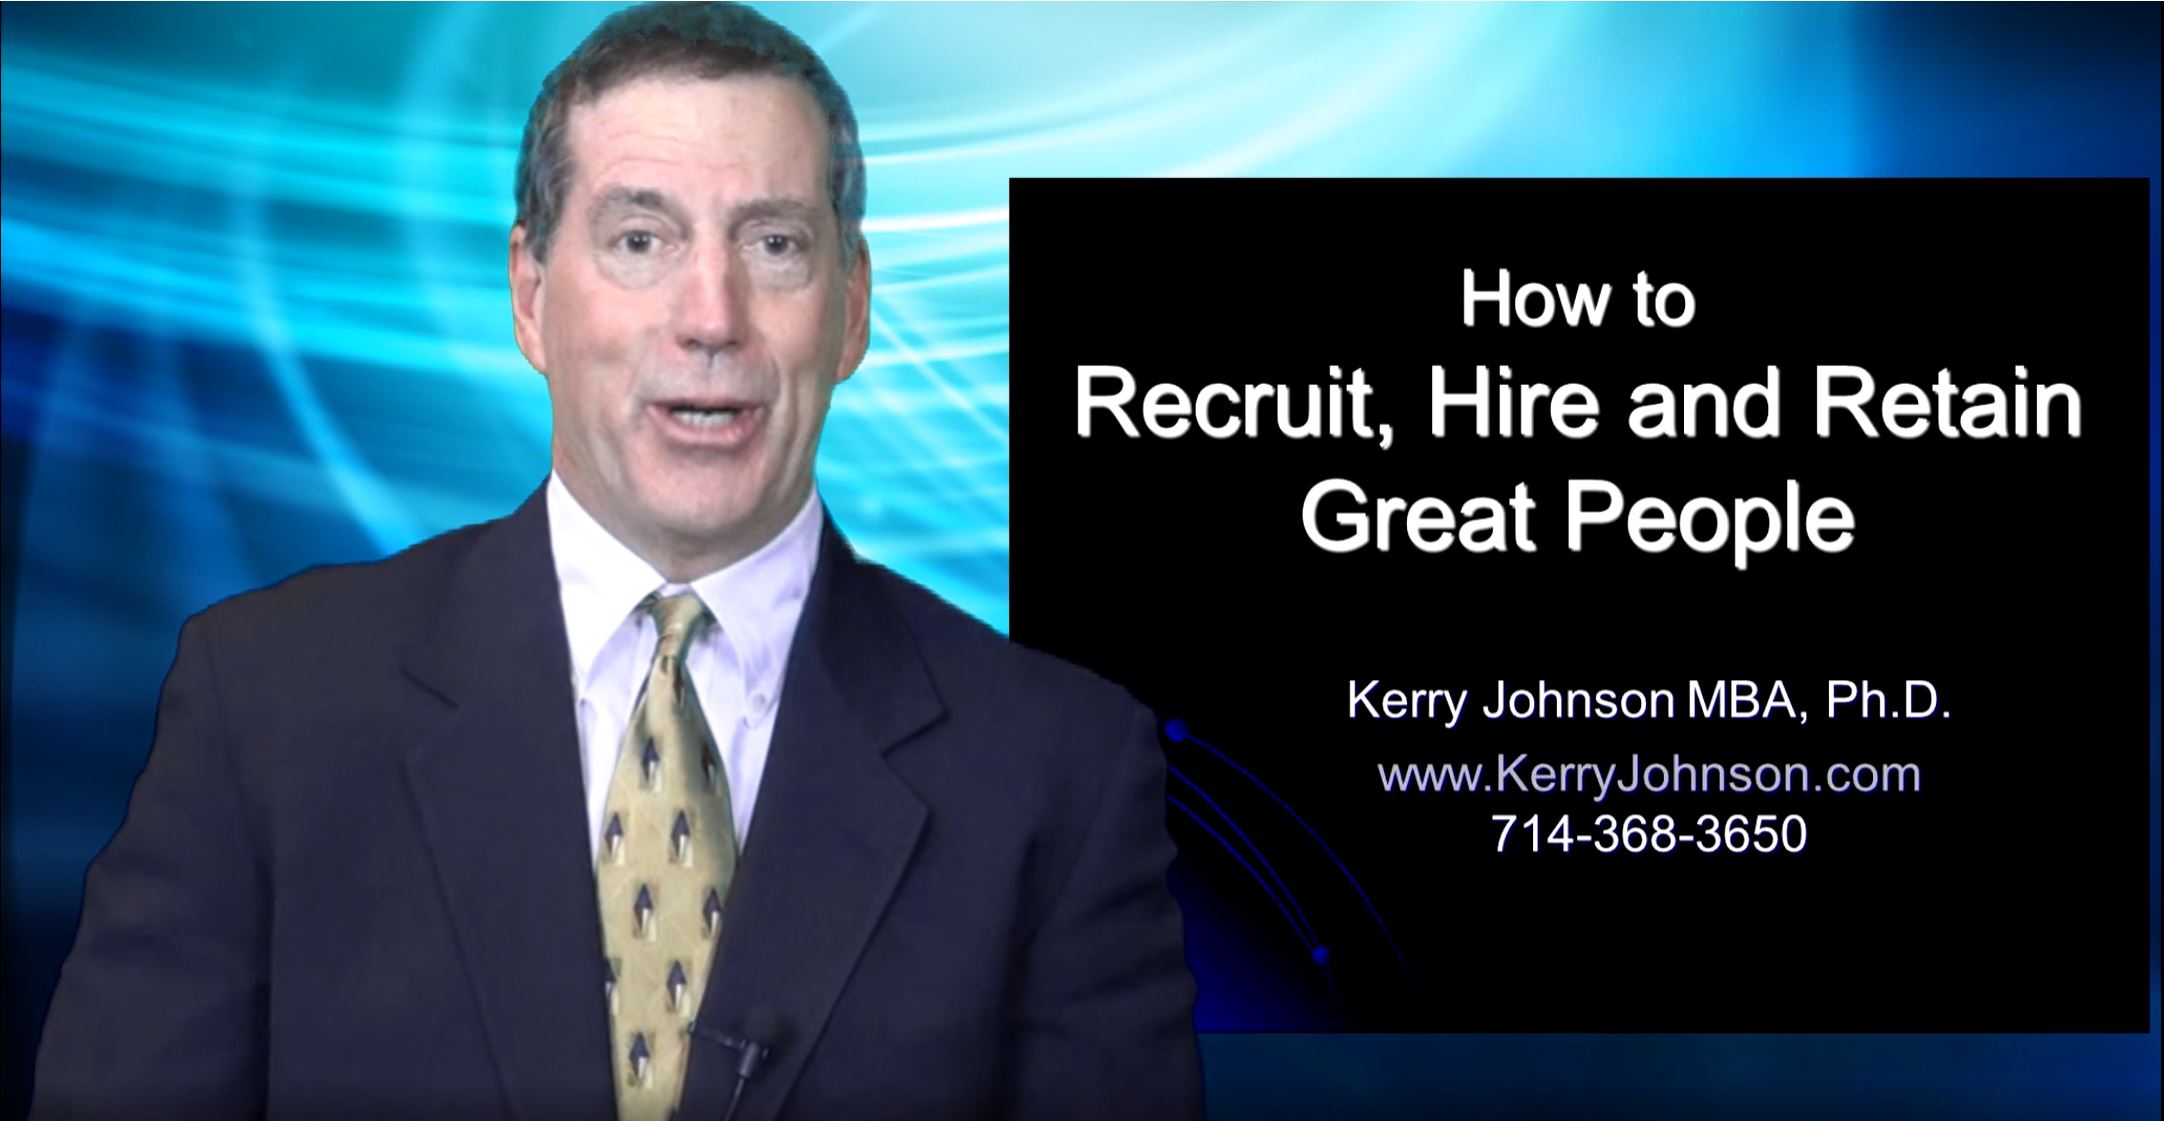 How to Recruit, Hire and Retain Great People Part 1